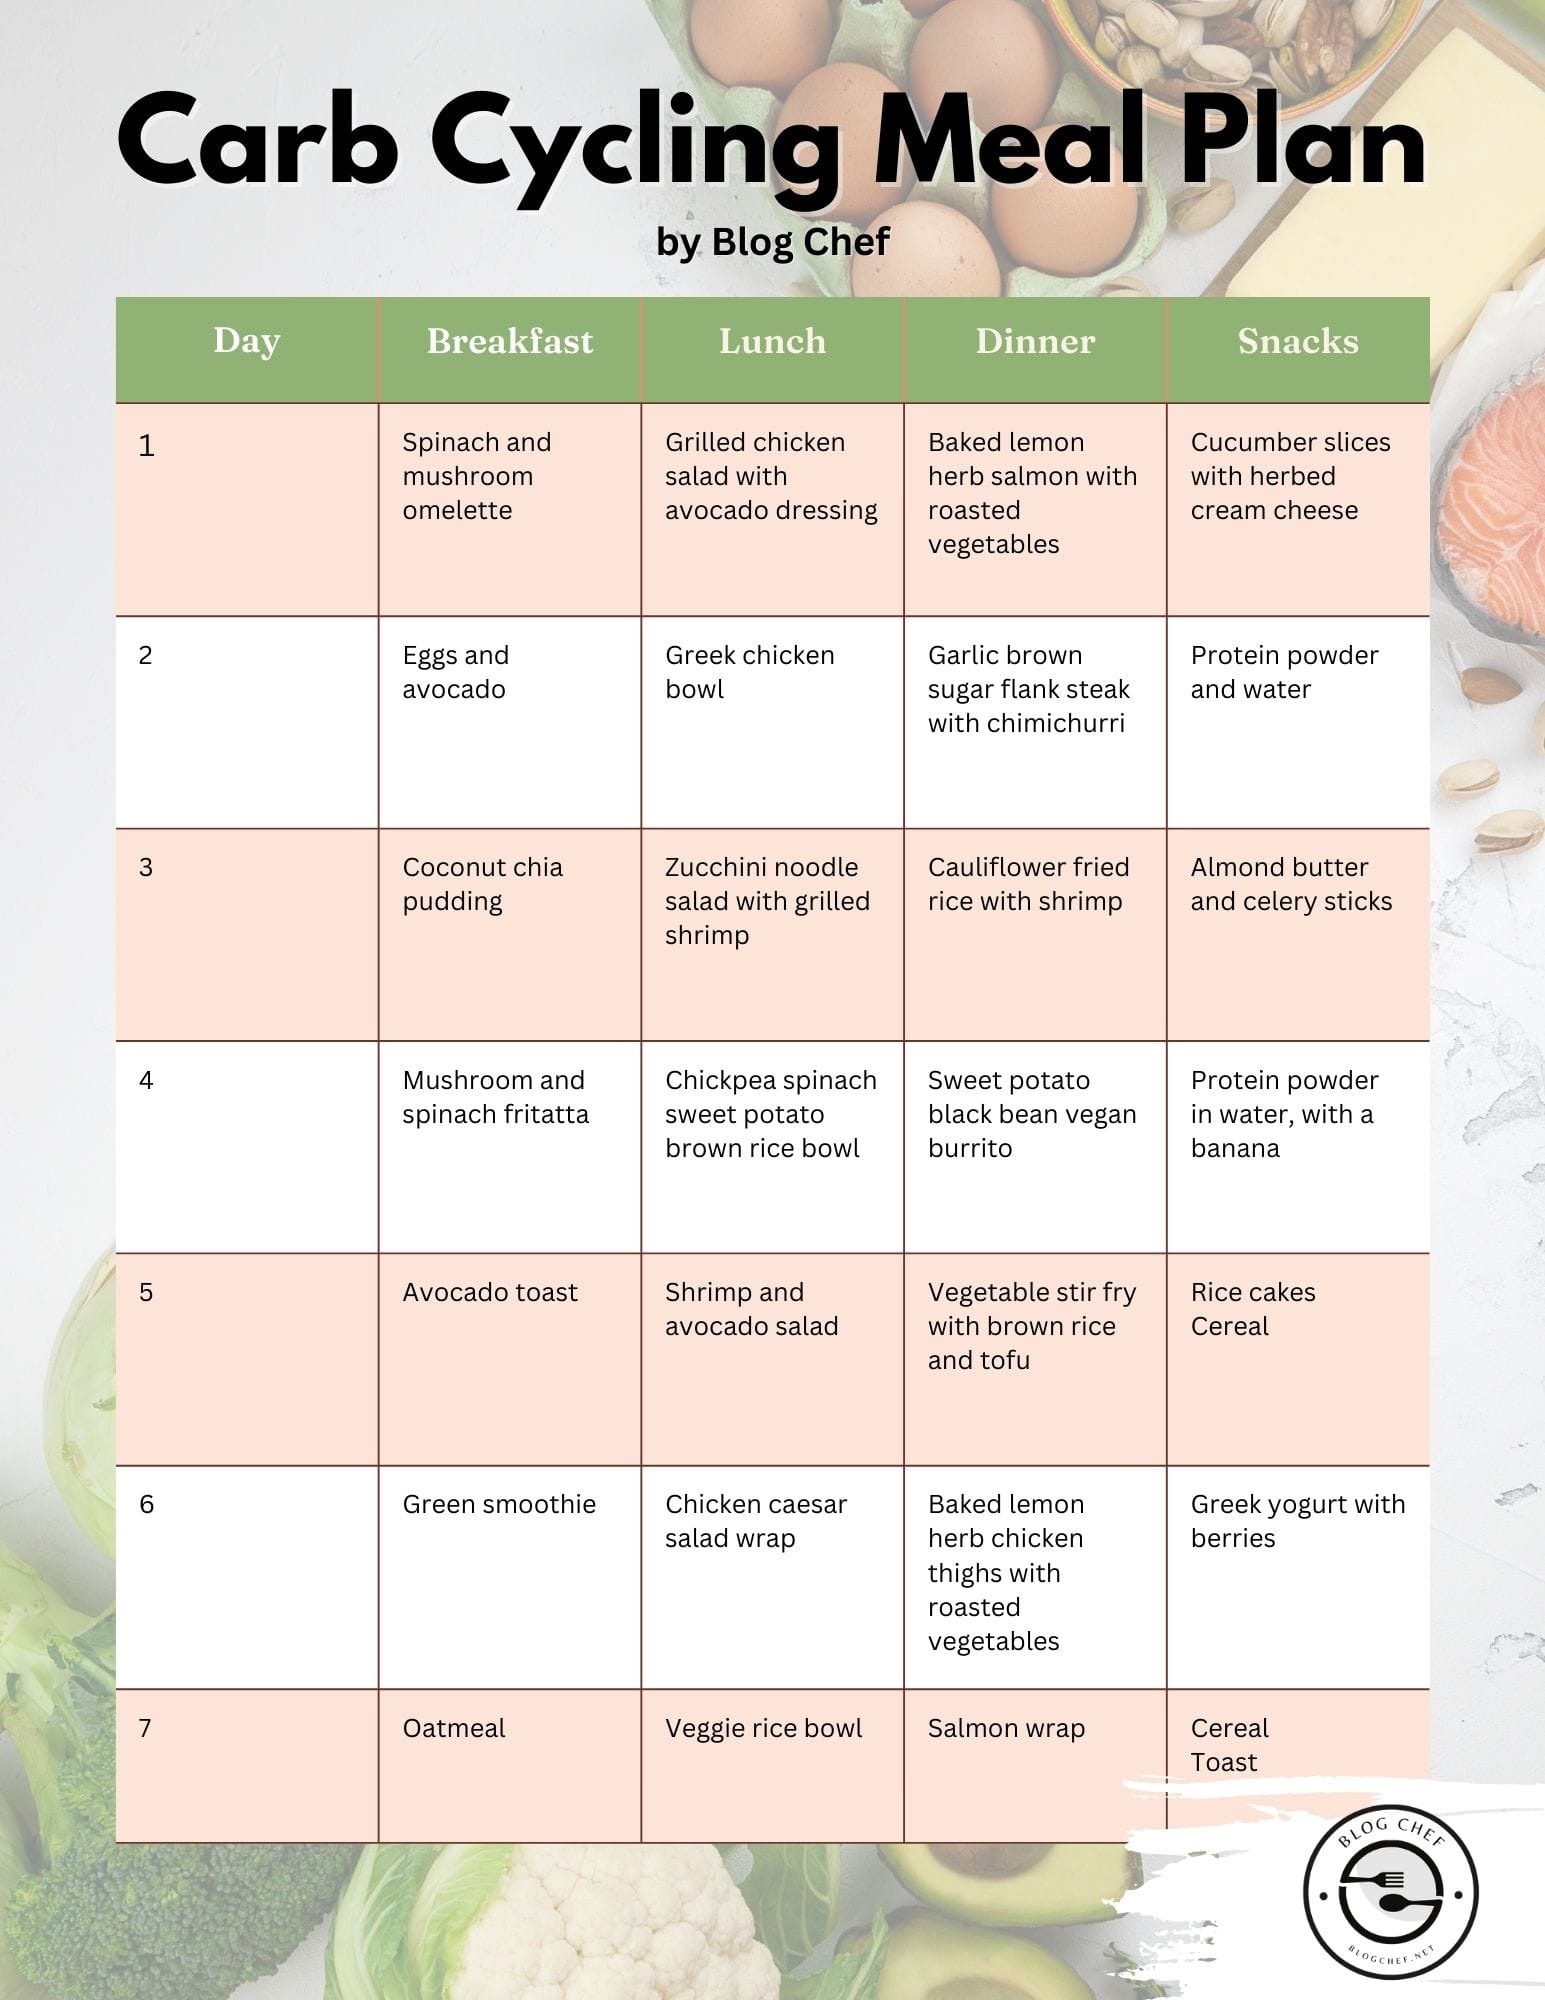 12 week carb cycling meal plan with breakfast, lunch, dinner, and snacks for 7 days.